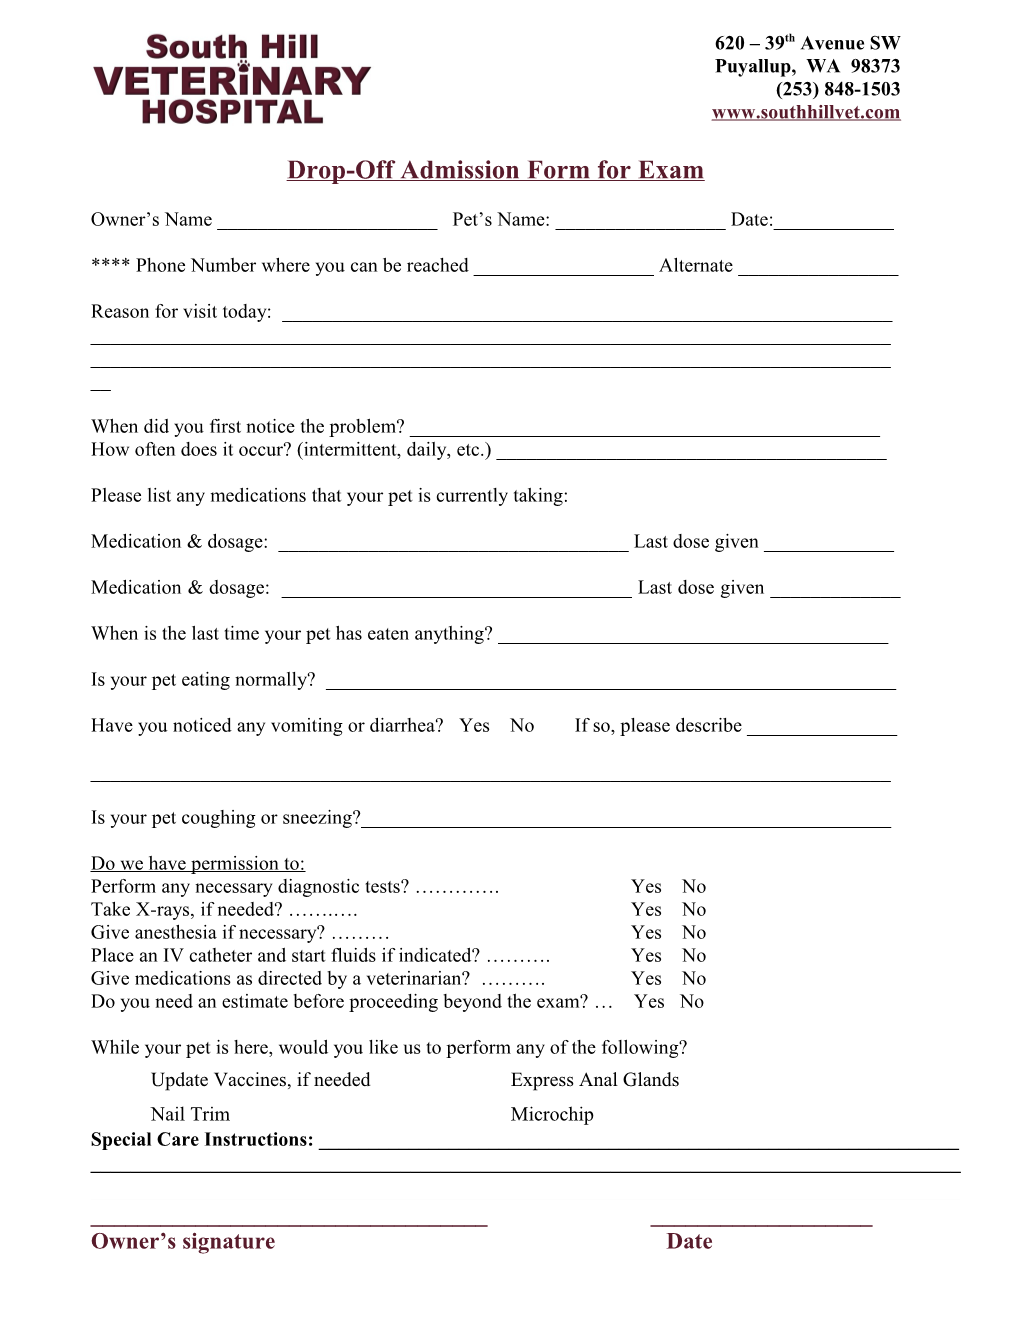 Drop-Off Admission Form for Exam